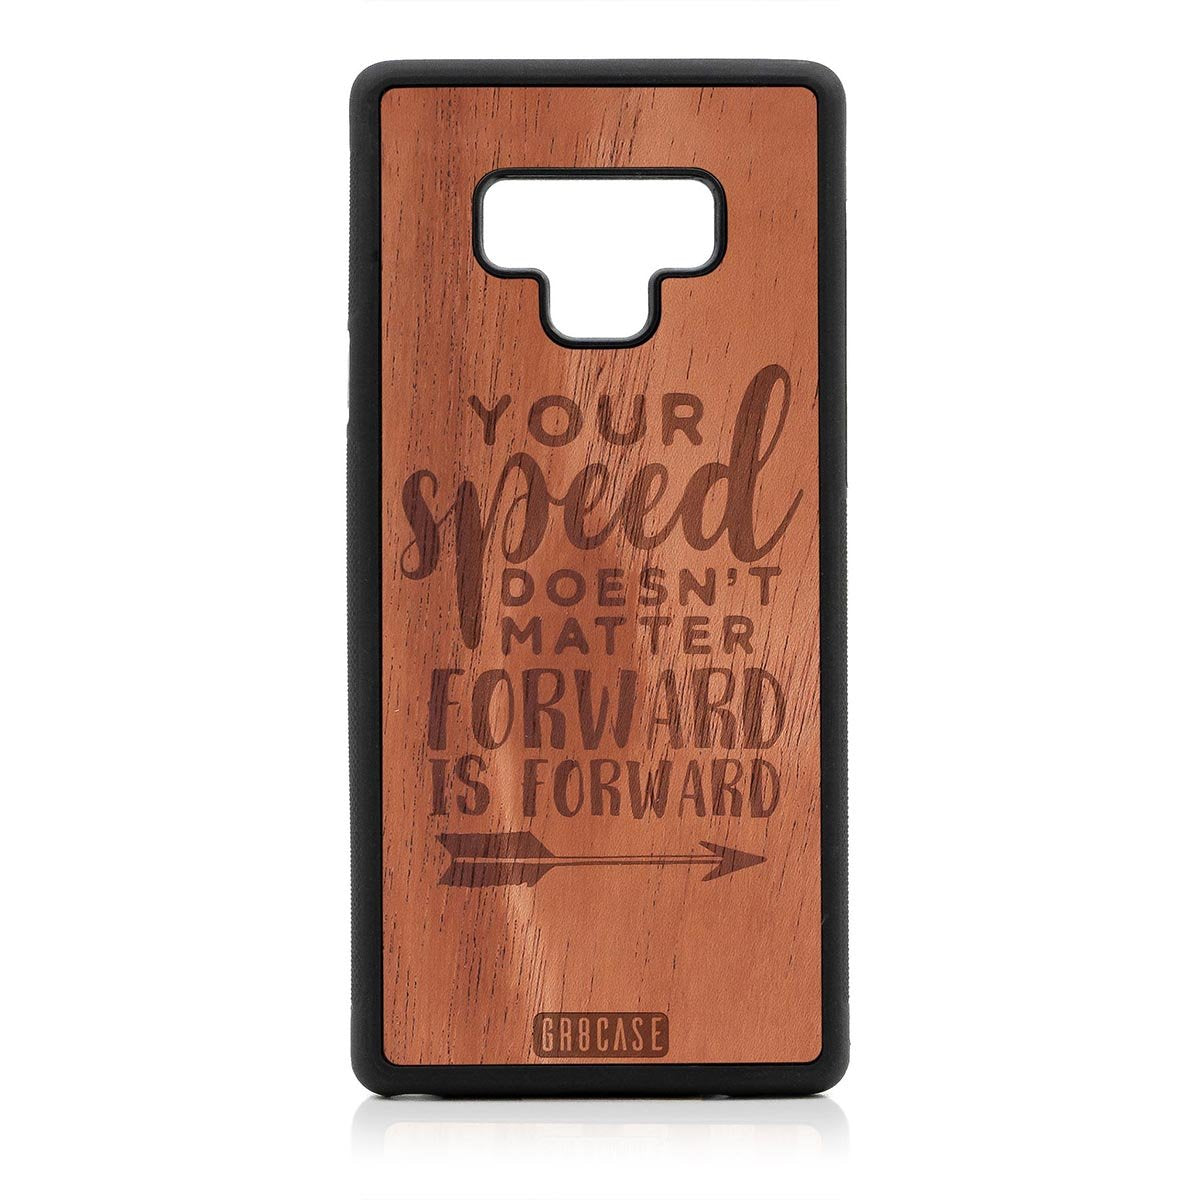 Your Speed Doesn't Matter Forward Is Forward Design Wood Case Samsung Galaxy Note 9